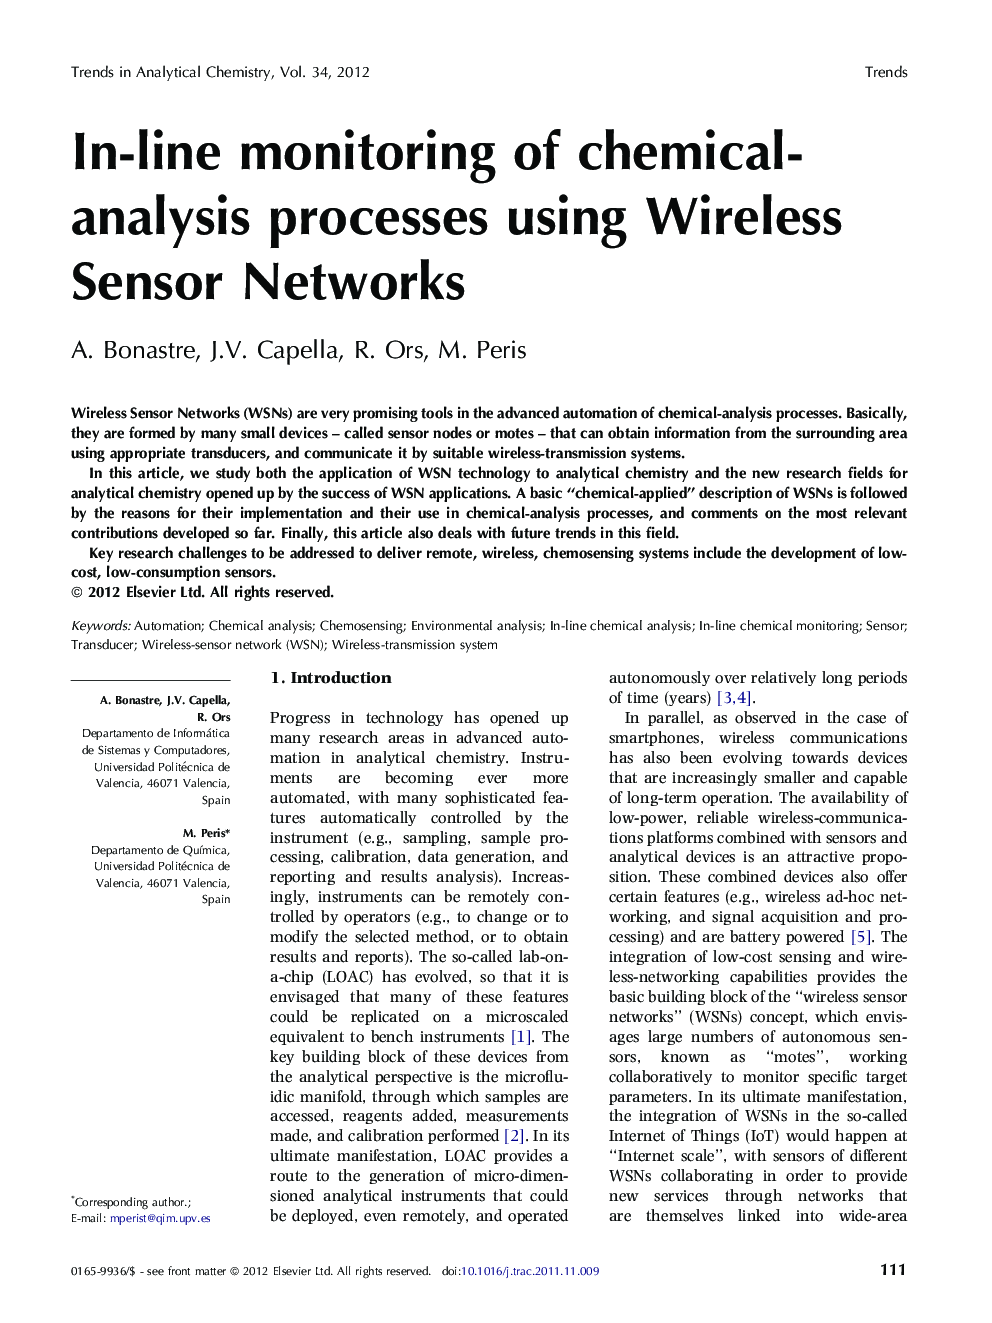 In-line monitoring of chemical-analysis processes using Wireless Sensor Networks